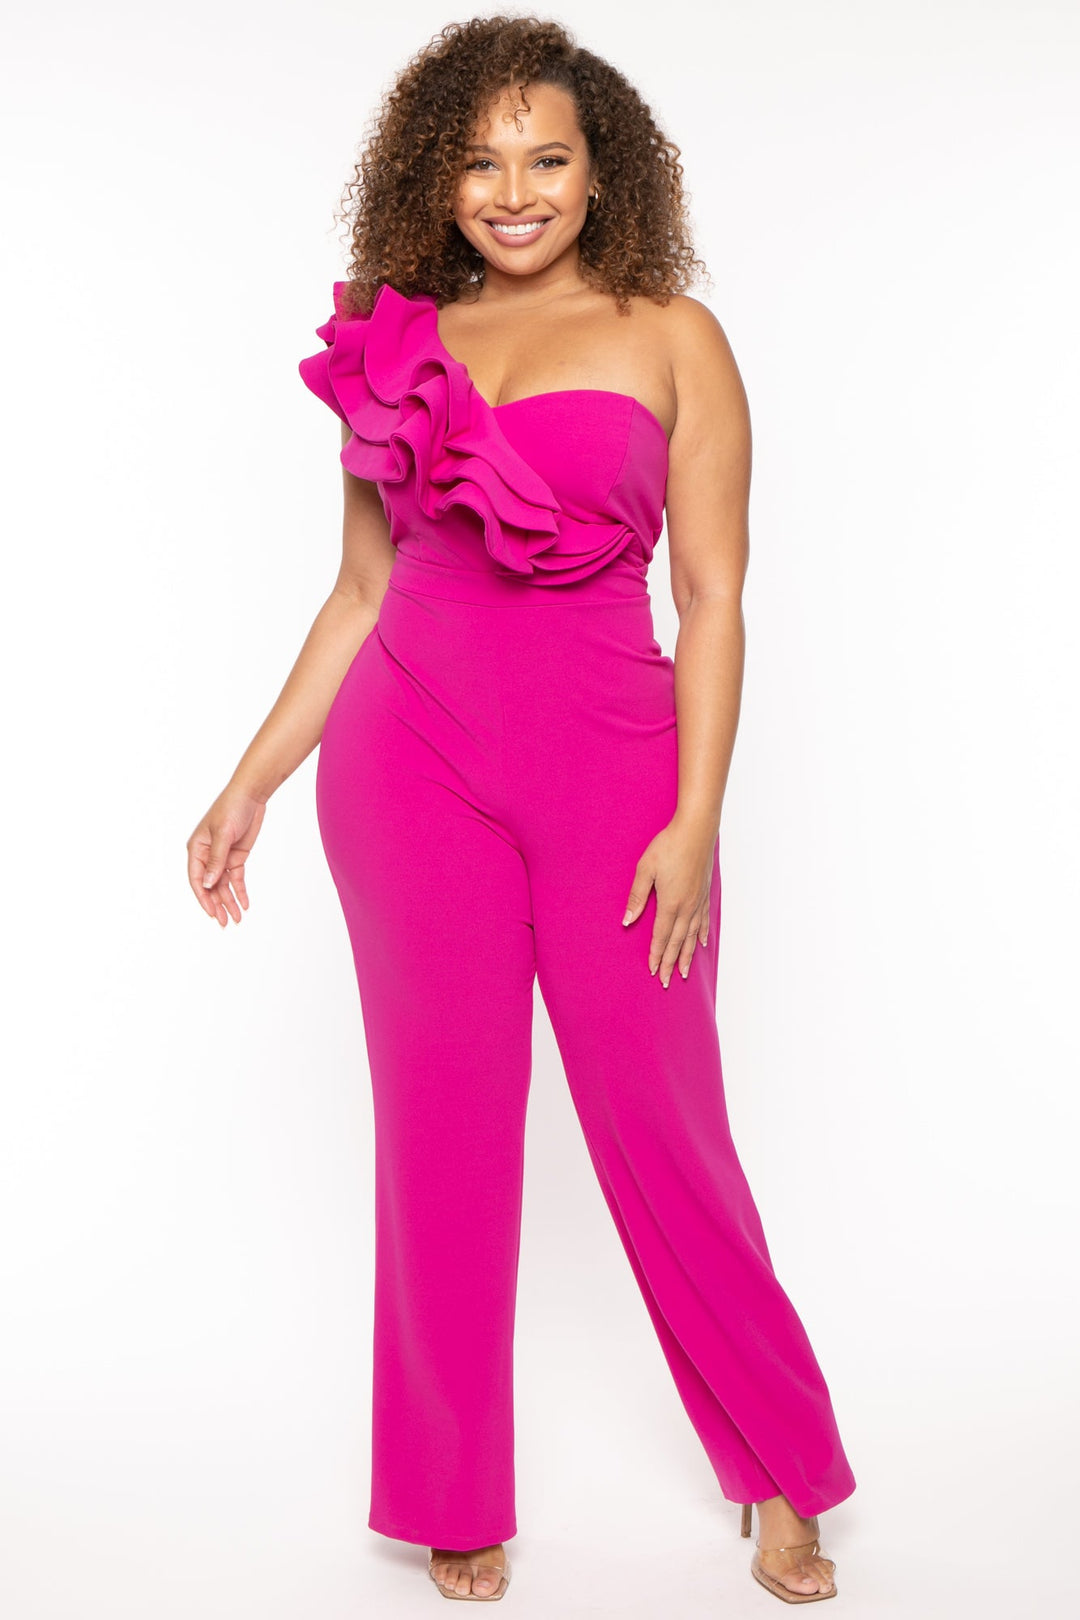 SYMPHONY Jumpsuits and Rompers 1X / Magenta Plus Size Lydie Ruffle One Shoulder  Jumpsuit -Magenta